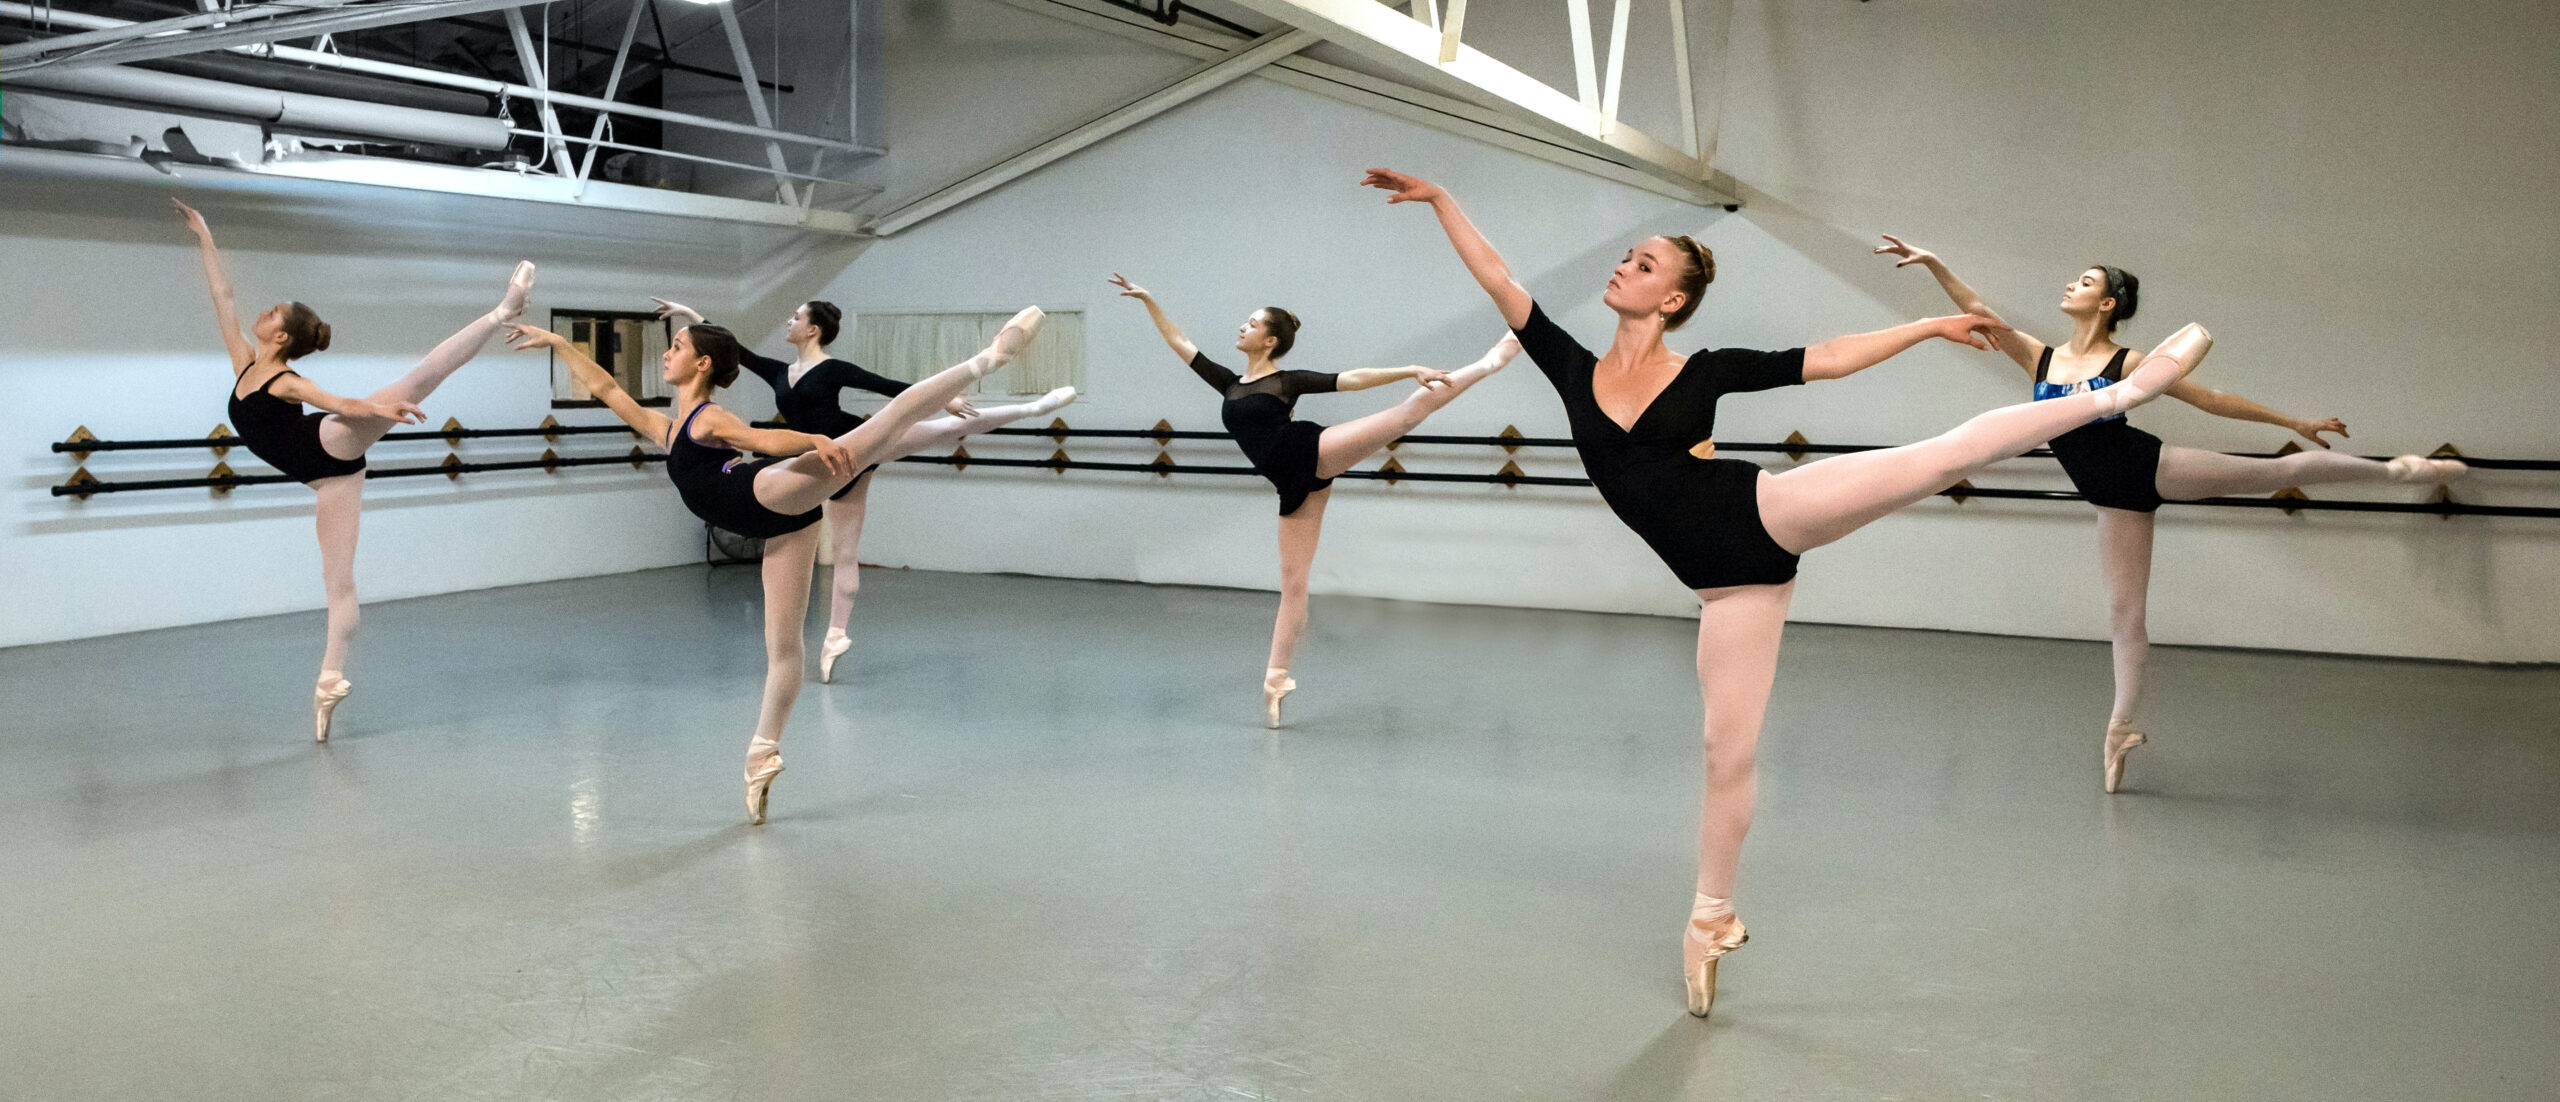 Students in advanced ballet class doing pointe work.